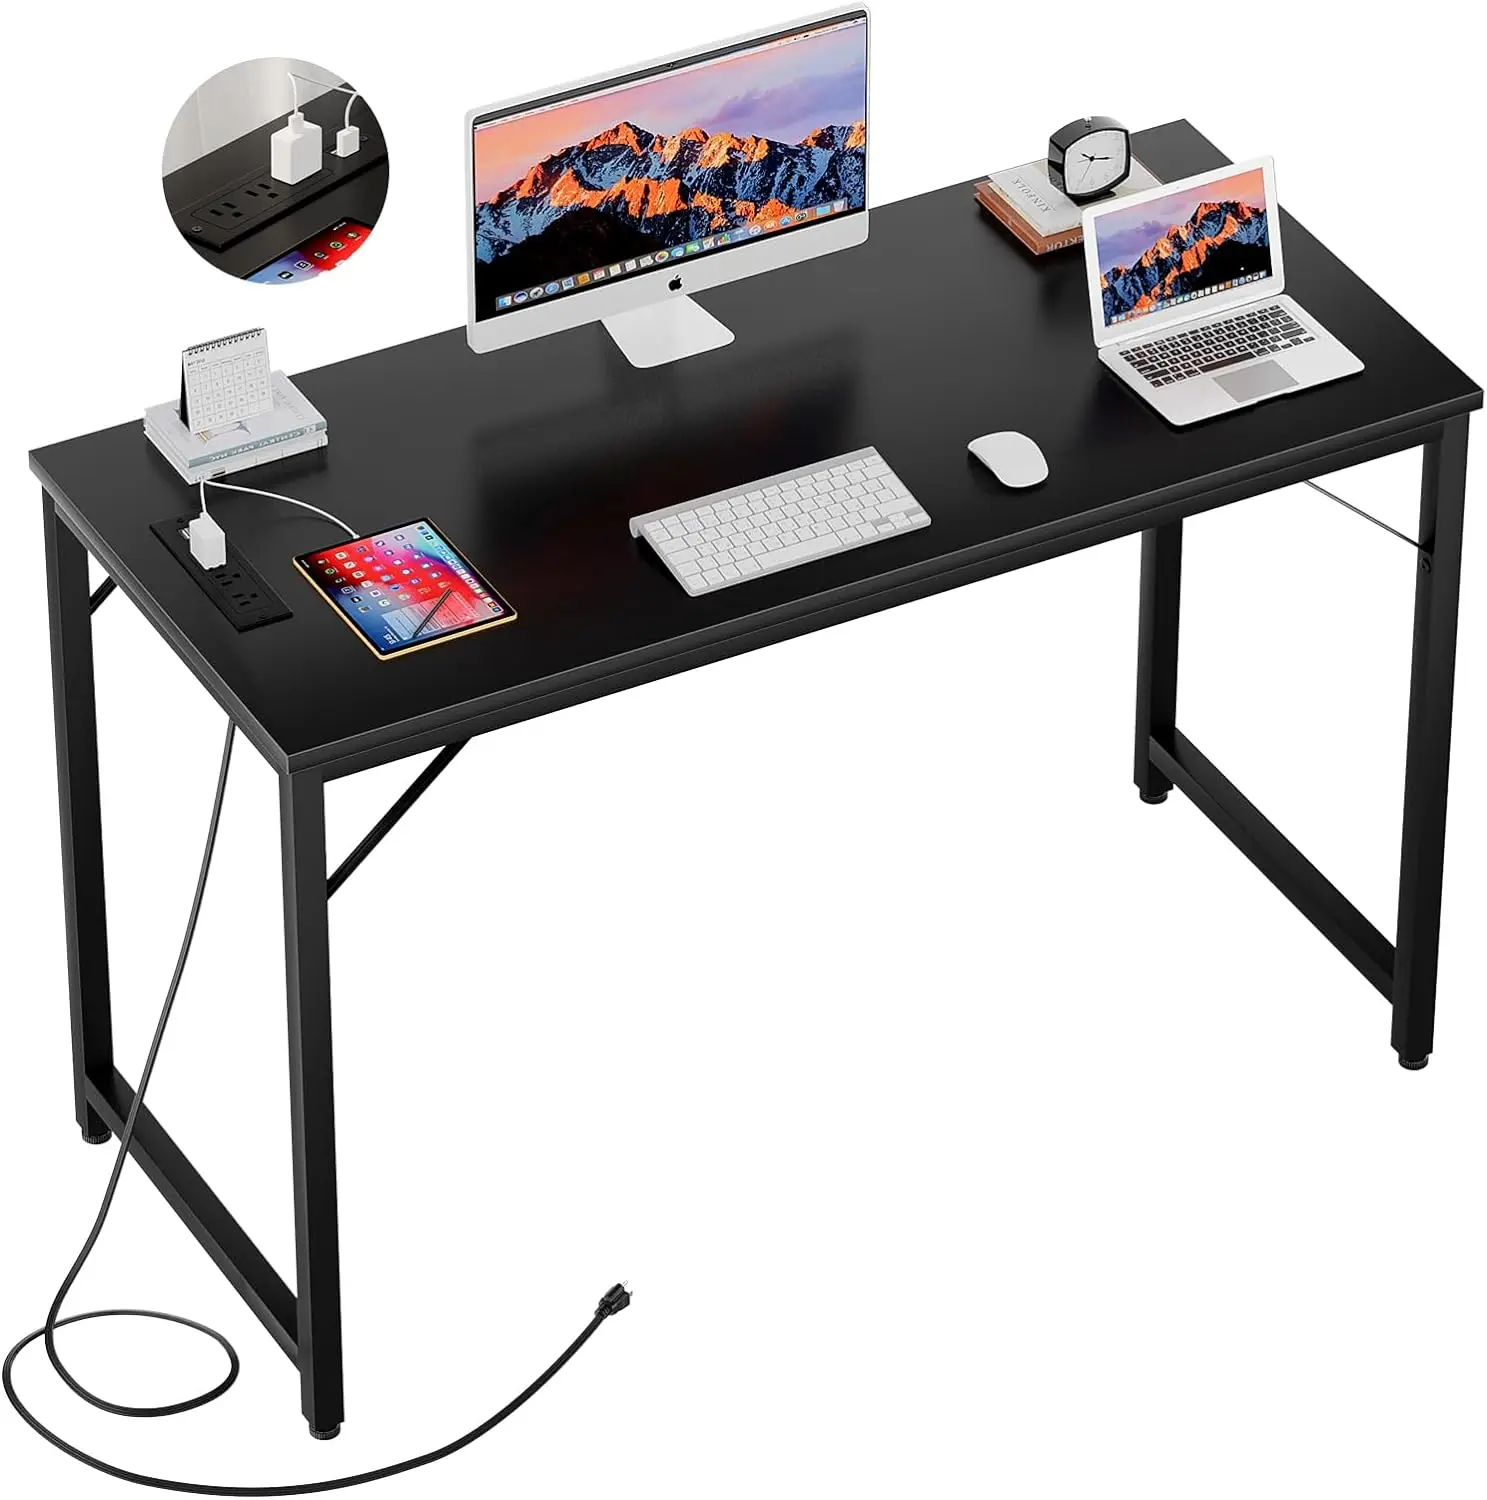 47 Inch Computer Desk with Magic Power Outlets, Modern Office Desk with USB Charging Ports, Sturdy Student Writing Desk 55 inch computer desk with magic power outlets modern office desk with usb charging ports sturdy student writing desk